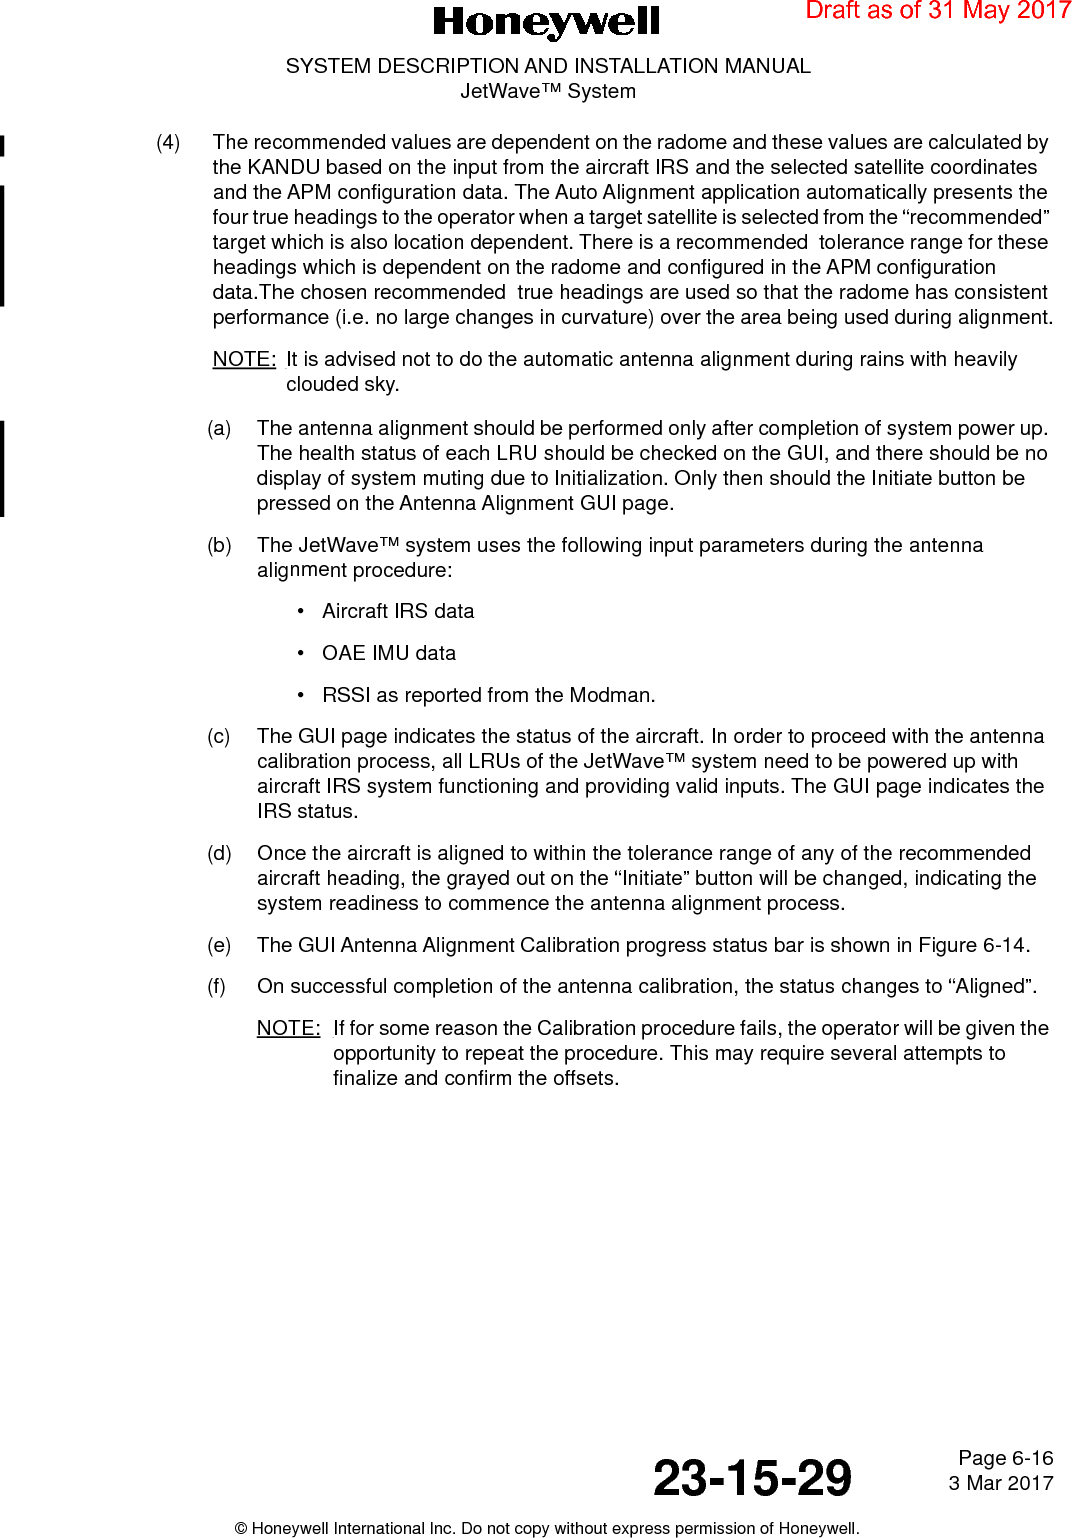 Page 6-16 3 Mar 201723-15-29SYSTEM DESCRIPTION AND INSTALLATION MANUALJetWave™ System© Honeywell International Inc. Do not copy without express permission of Honeywell.(4) The recommended values are dependent on the radome and these values are calculated by the KANDU based on the input from the aircraft IRS and the selected satellite coordinates and the APM configuration data. The Auto Alignment application automatically presents the four true headings to the operator when a target satellite is selected from the “recommended” target which is also location dependent. There is a recommended  tolerance range for these headings which is dependent on the radome and configured in the APM configuration data.The chosen recommended  true headings are used so that the radome has consistent performance (i.e. no large changes in curvature) over the area being used during alignment.NOTE: It is advised not to do the automatic antenna alignment during rains with heavily clouded sky.(a) The antenna alignment should be performed only after completion of system power up. The health status of each LRU should be checked on the GUI, and there should be no display of system muting due to Initialization. Only then should the Initiate button be pressed on the Antenna Alignment GUI page.(b) The JetWave™ system uses the following input parameters during the antenna alignment procedure:• Aircraft IRS data• OAE IMU data• RSSI as reported from the Modman.(c) The GUI page indicates the status of the aircraft. In order to proceed with the antenna calibration process, all LRUs of the JetWave™ system need to be powered up with aircraft IRS system functioning and providing valid inputs. The GUI page indicates the IRS status. (d) Once the aircraft is aligned to within the tolerance range of any of the recommended aircraft heading, the grayed out on the “Initiate” button will be changed, indicating the system readiness to commence the antenna alignment process. (e) The GUI Antenna Alignment Calibration progress status bar is shown in Figure 6-14.(f) On successful completion of the antenna calibration, the status changes to “Aligned”.NOTE: If for some reason the Calibration procedure fails, the operator will be given the opportunity to repeat the procedure. This may require several attempts to finalize and confirm the offsets.Draft as of 31 May 2017